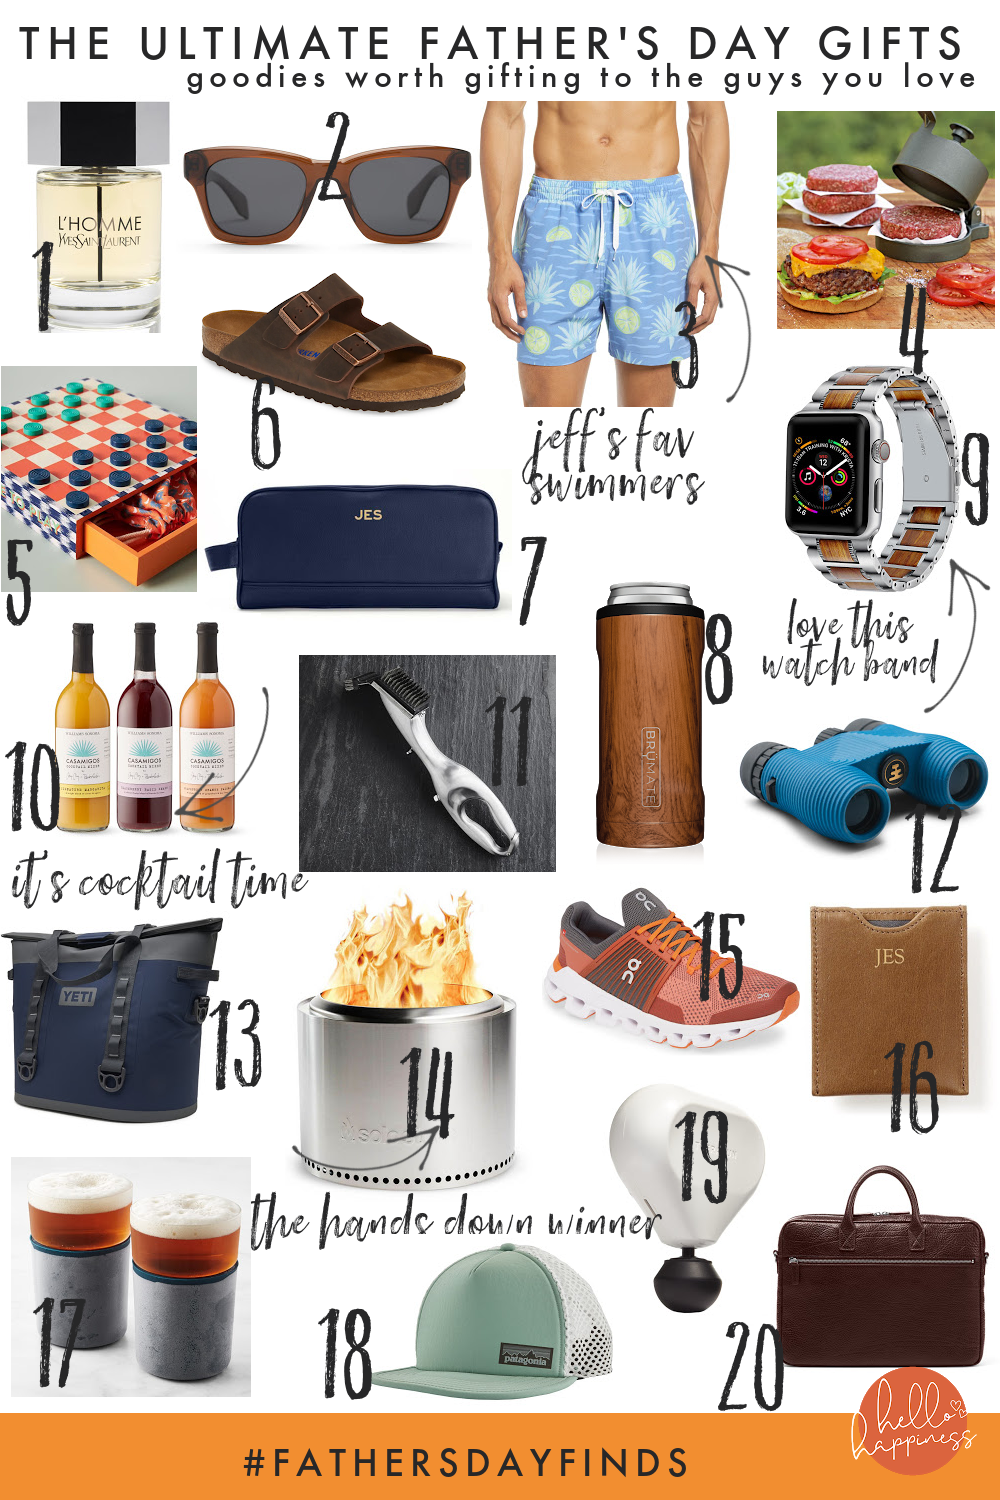 Best Father's Day Gifts by popular Nashville life and style blog, Hello Happiness: collage image of YSL L"Homme Eau de Toilette cologne, Whiskey Grey dean sunglasses, Chubbies Swim Trunks, adjustable nonstick burger press, time to play checkers game, Arizona soft slide sandals, leather toiletry bag, Hopsulator slim in walnut, stainless steel and wood Apple Watch band, Casamigos cocktail trio, Grand Grill Daddy cleaning brush, Waterproof binoculars, Yeti M30 cooler, bonfire solo stove, cloud swift running shoe, money clip card case, Rabbit freezable beer glasses, duckbill trucker hat, mini percussive therapy massager, and Knox slim laptop bag.